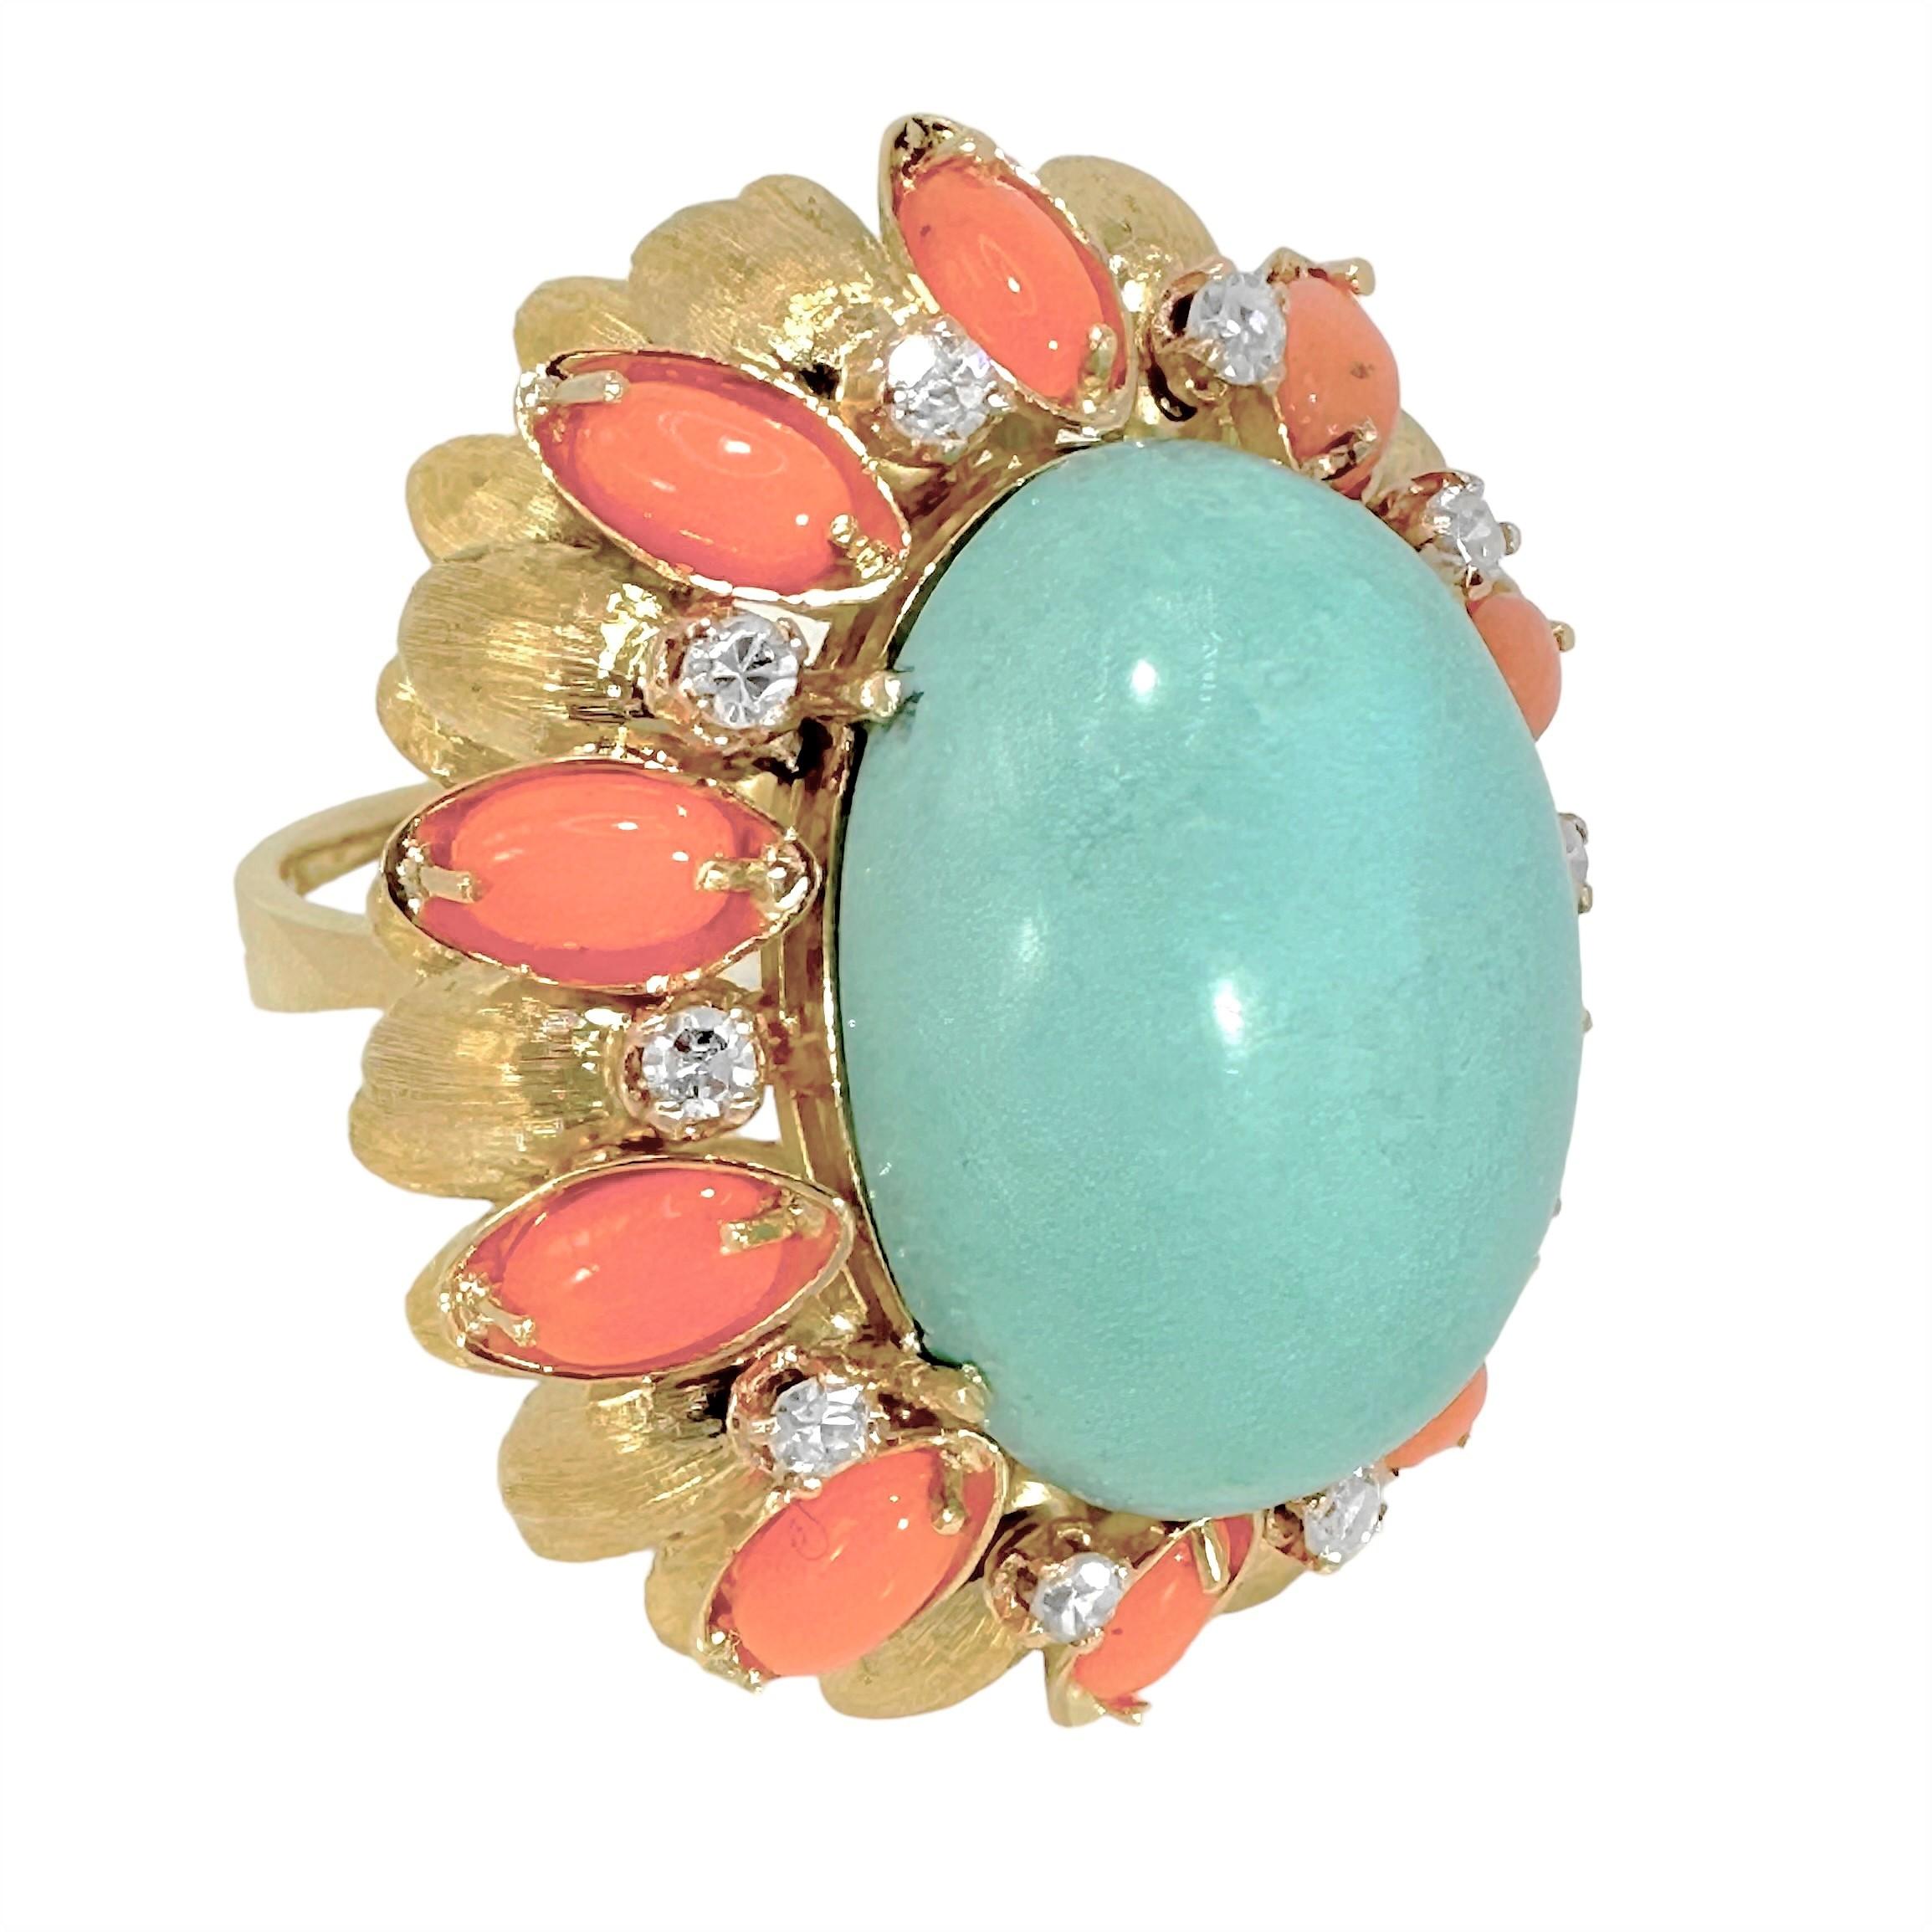 Modern Large Scale Mid-20th Century 18K Yellow Gold, Coral, Turquoise and Diamond Ring For Sale